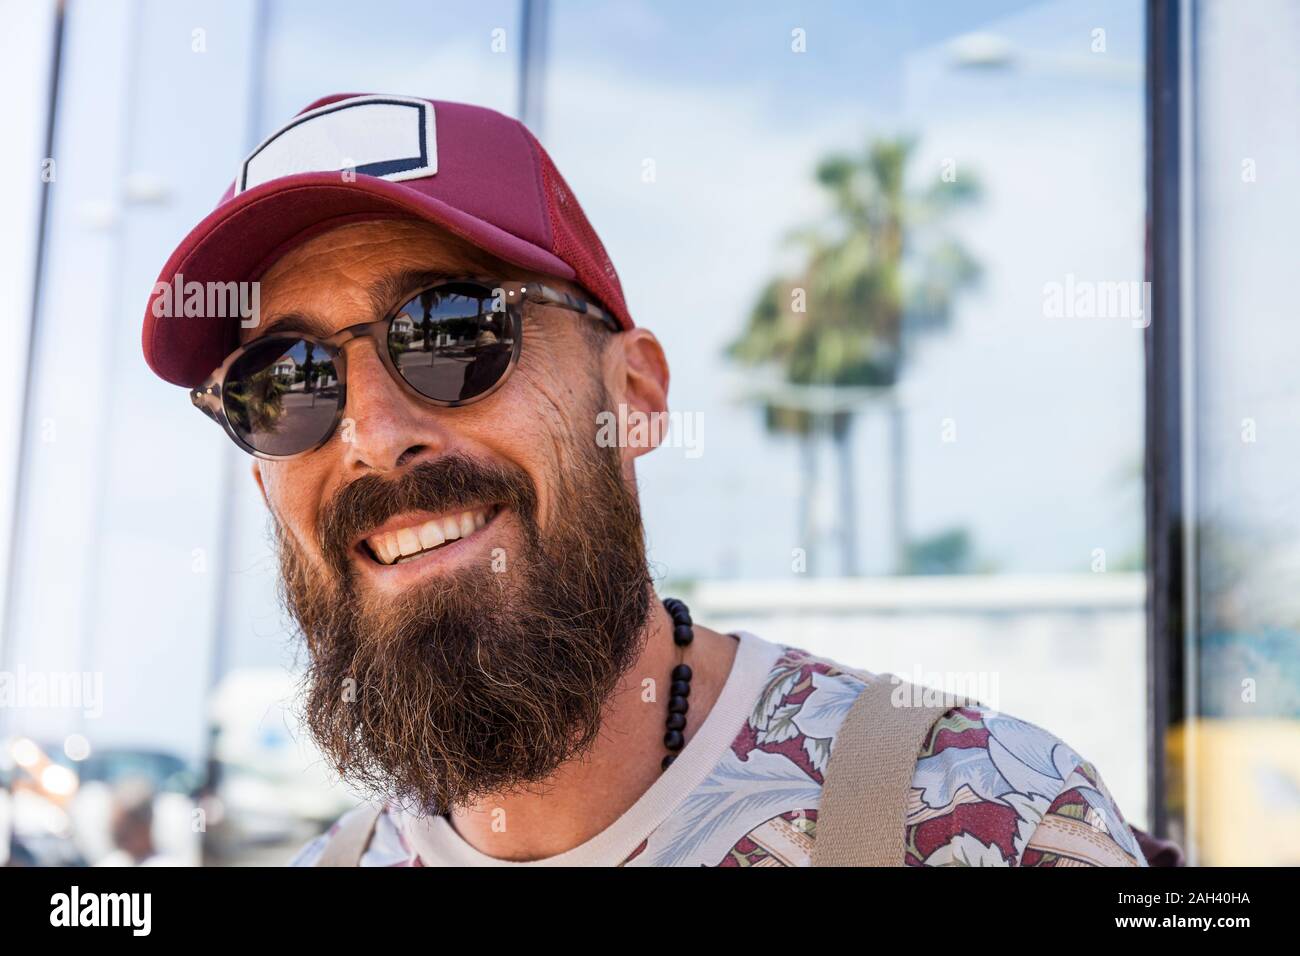 Smiling Young man with Red Beard, basecap et lunettes Banque D'Images